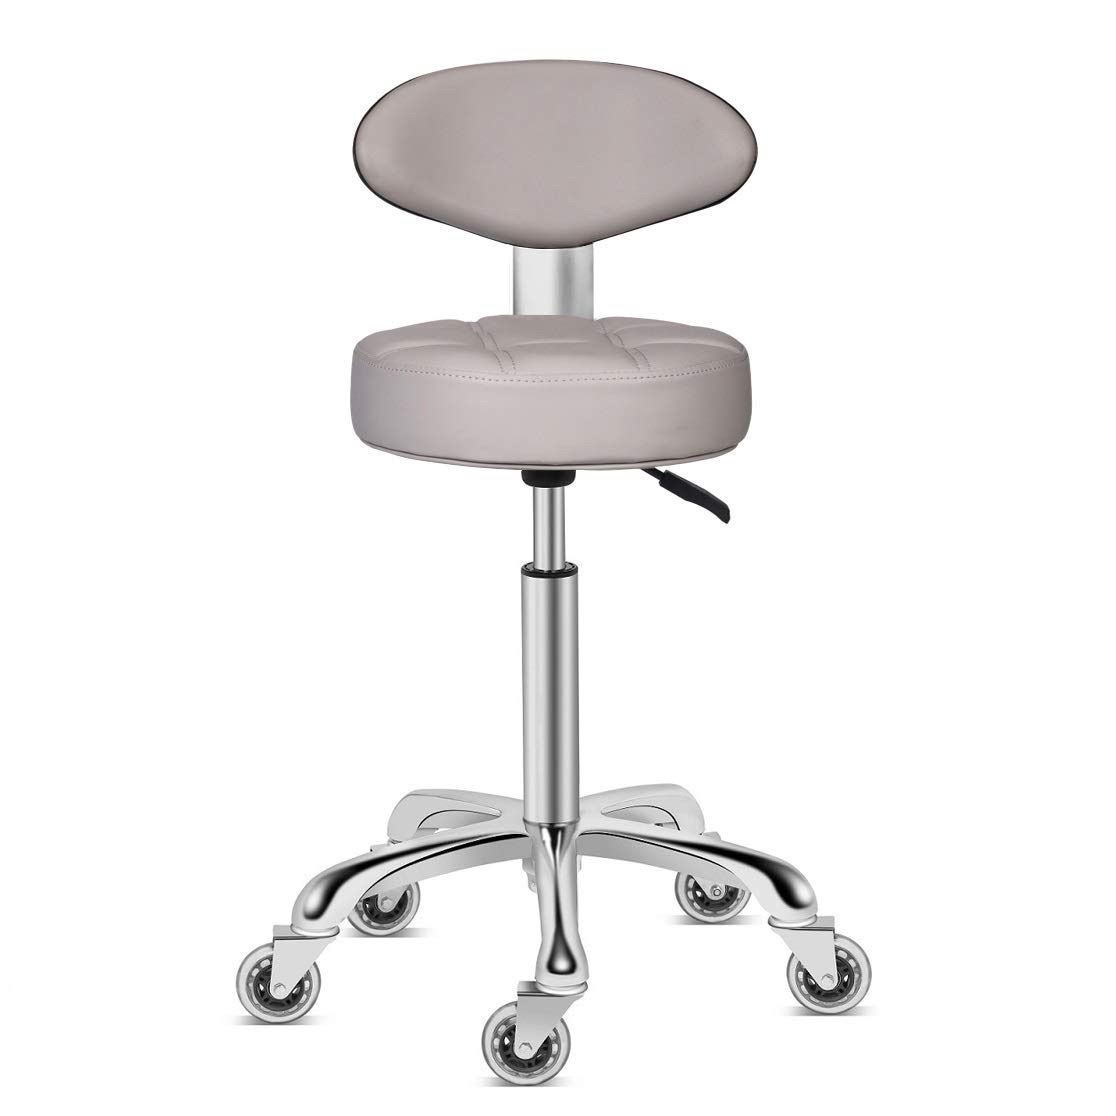 Kaleurrier Swivel Stool Chair Adjustable Height,Heavy Duty Hydraulic Rolling Metal Stool for Kitchen,Salon,Bar,Office,Massage (with Back Rest) (Grey)